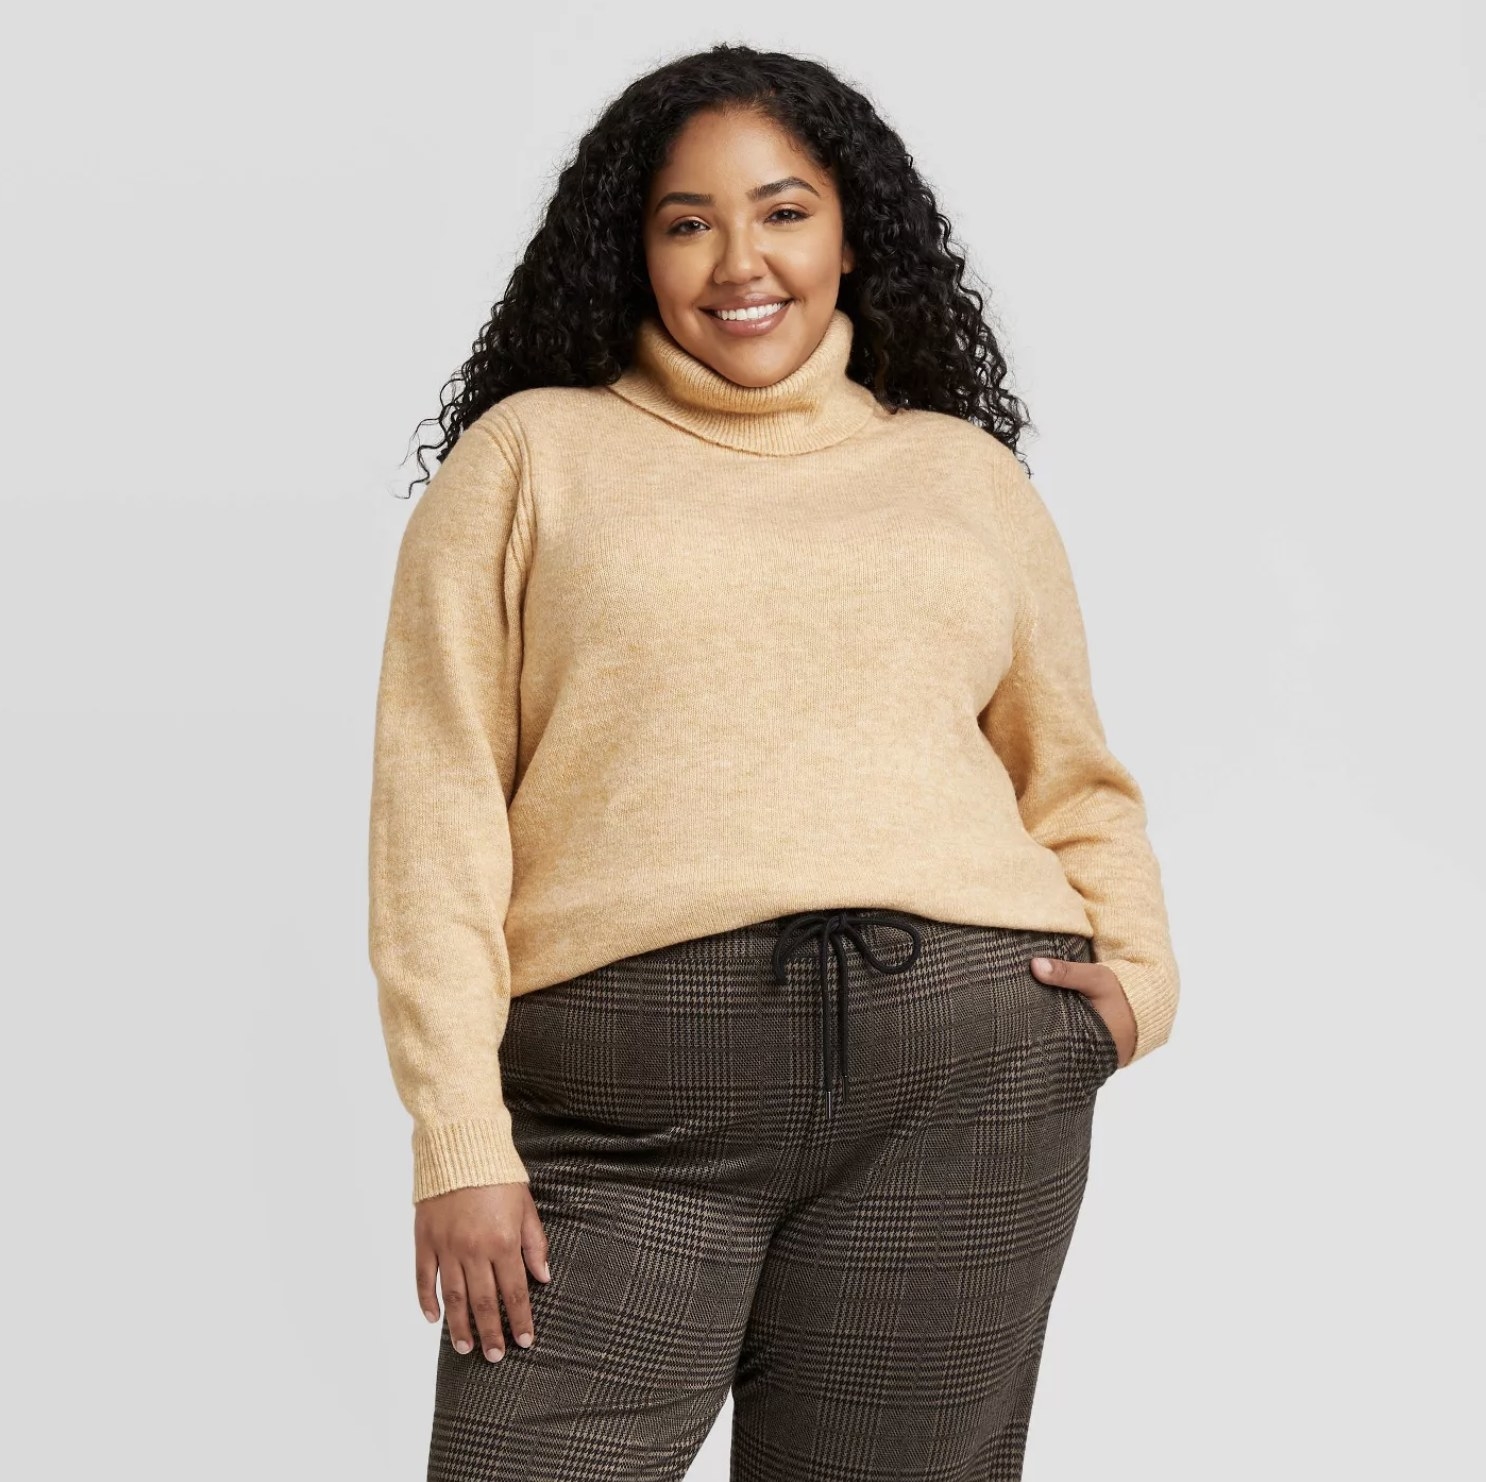 Model is wearing a cream pullover turtleneck sweater and plaid pants